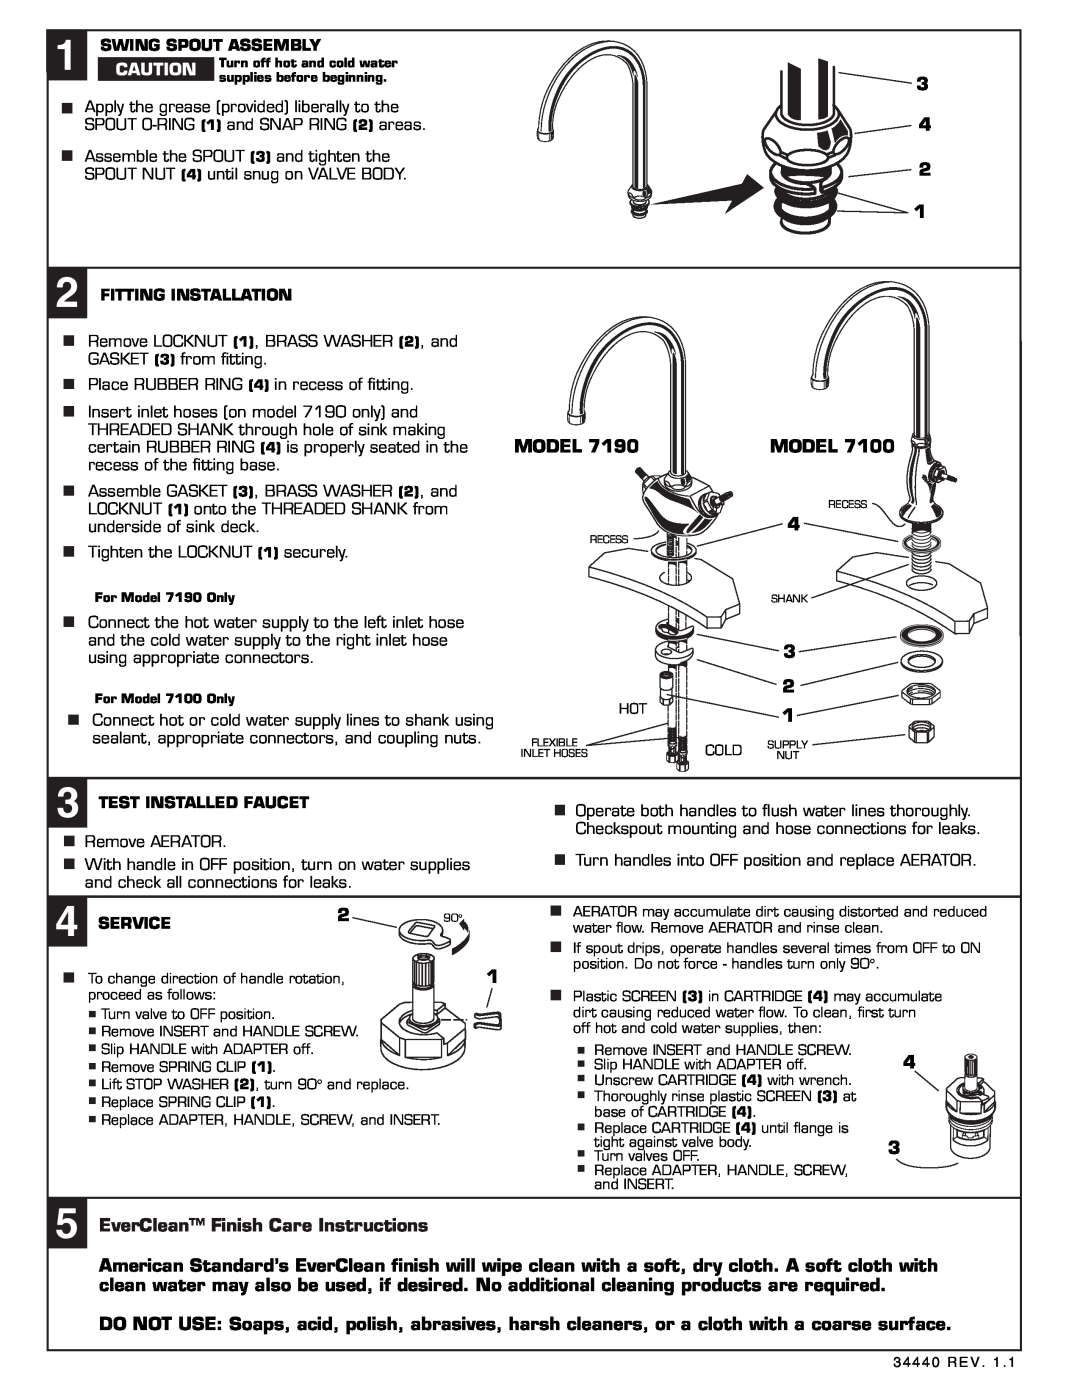 American Standard 7191 Series installation instructions EverClean Finish Care Instructions 